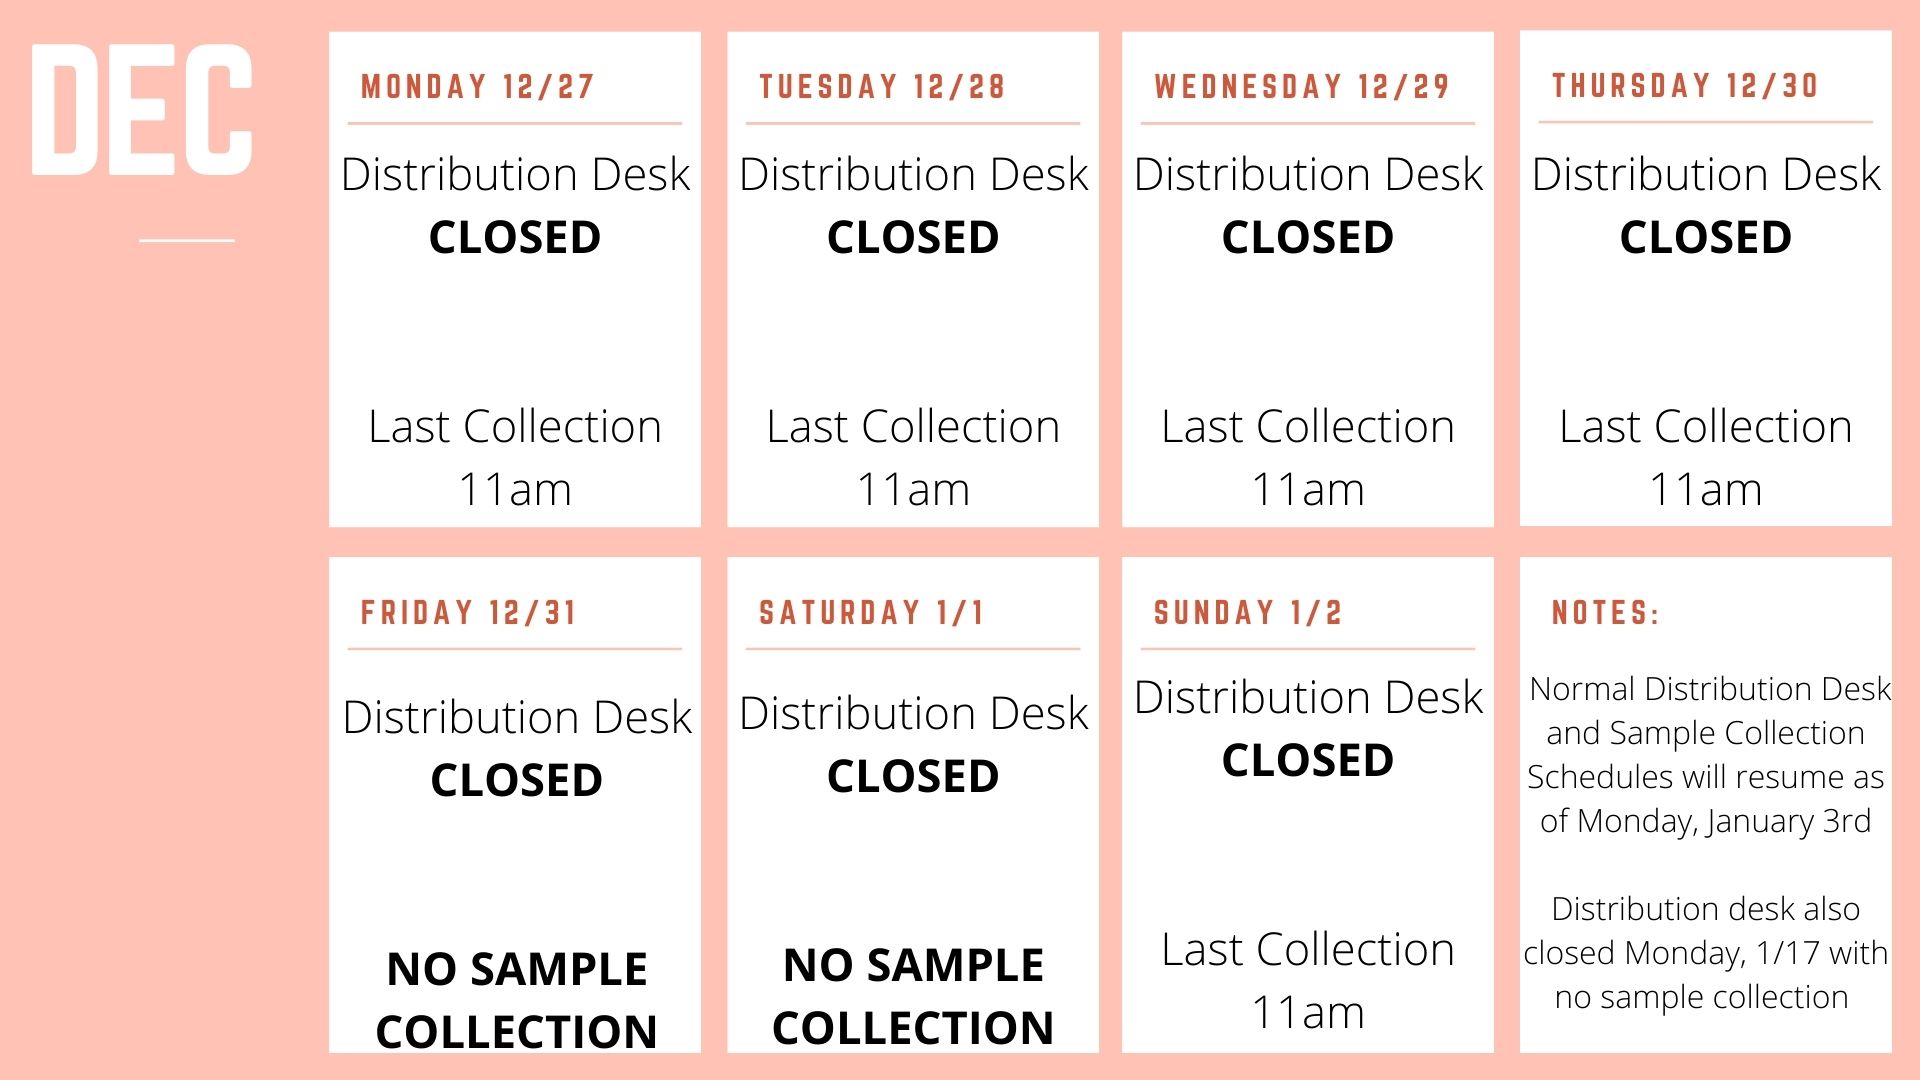 COVID testing schedule for December 27 through January 2. The distribution desk is closed. Last collection is 11 a.m. from 11/27 through 11/30 as well as 1/2. Notes: Normal Distribution Desk and Sample Collection Schedules will resume as of Monday, January 3rd. Distribution desk also closed Monday, 1/17 with no sample collection.